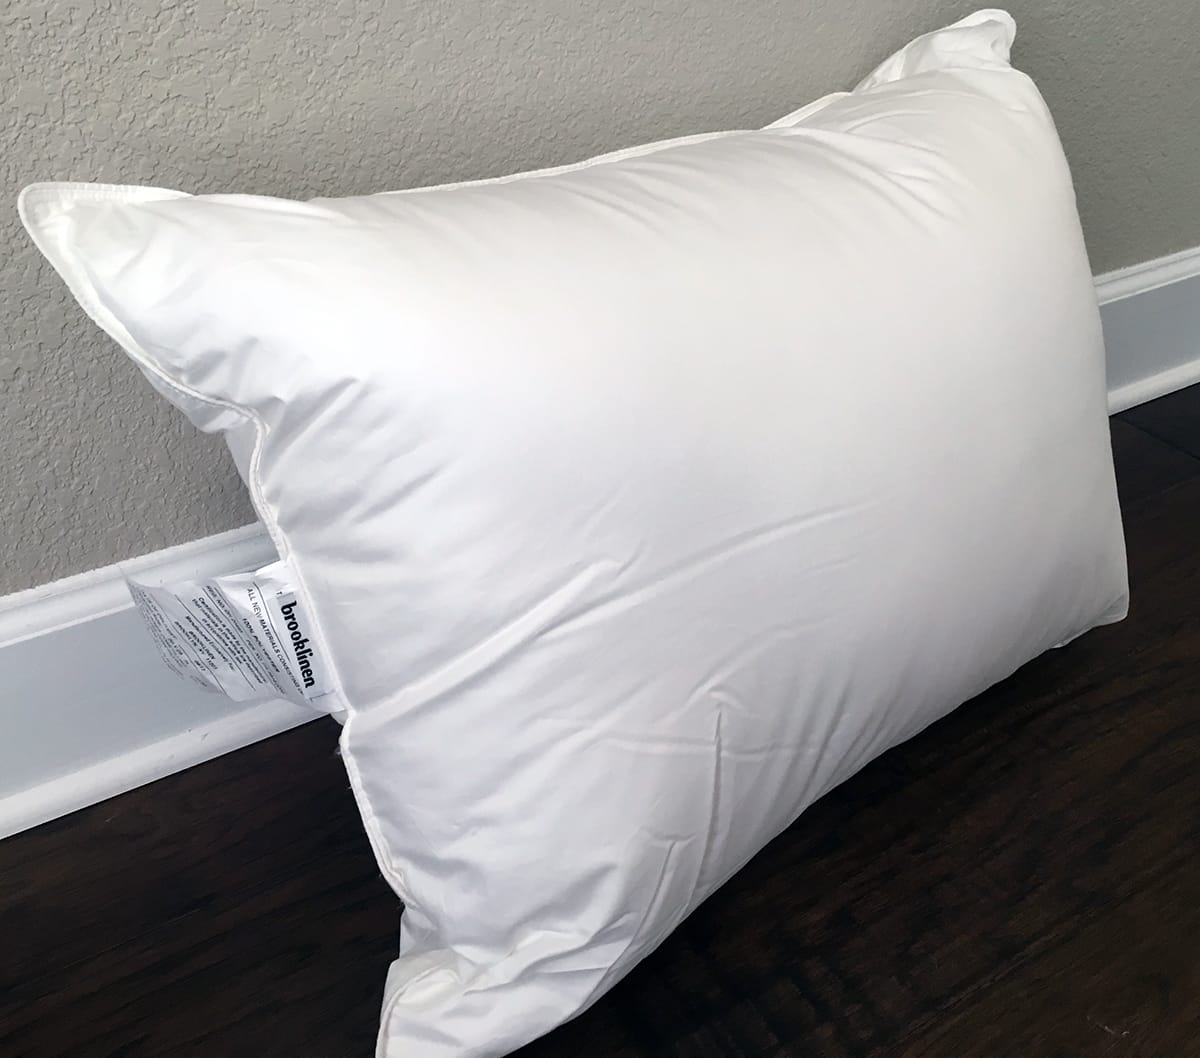 Down Alternative Pillow - Eco-Conscious and Allergy-Friendly Fill - Size King by Brooklinen